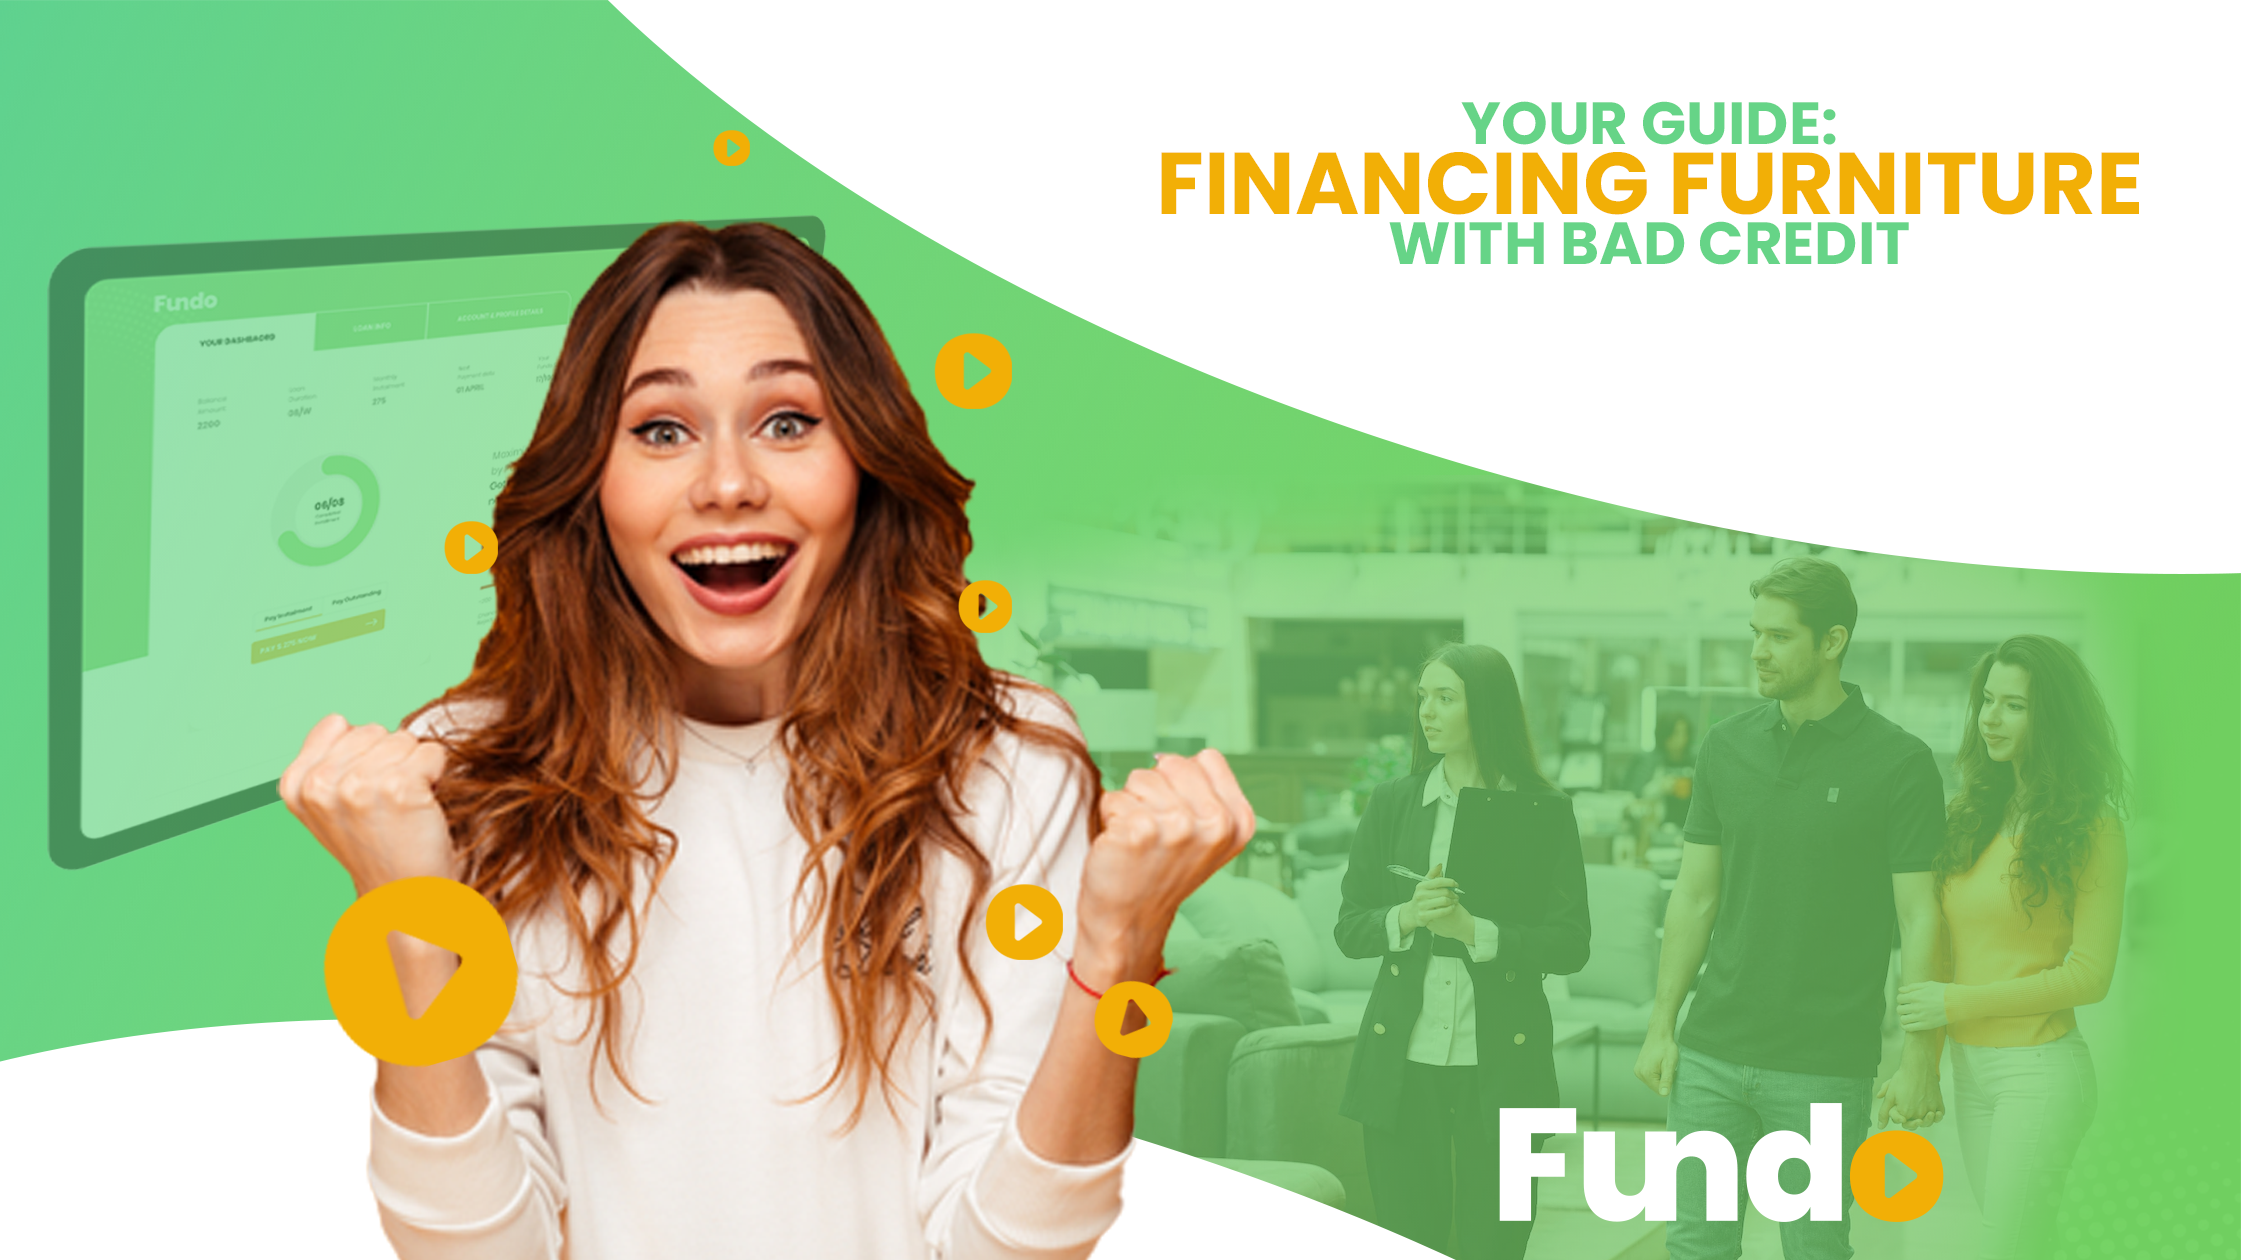 Your guide: Financing for Furniture with Bad Credit